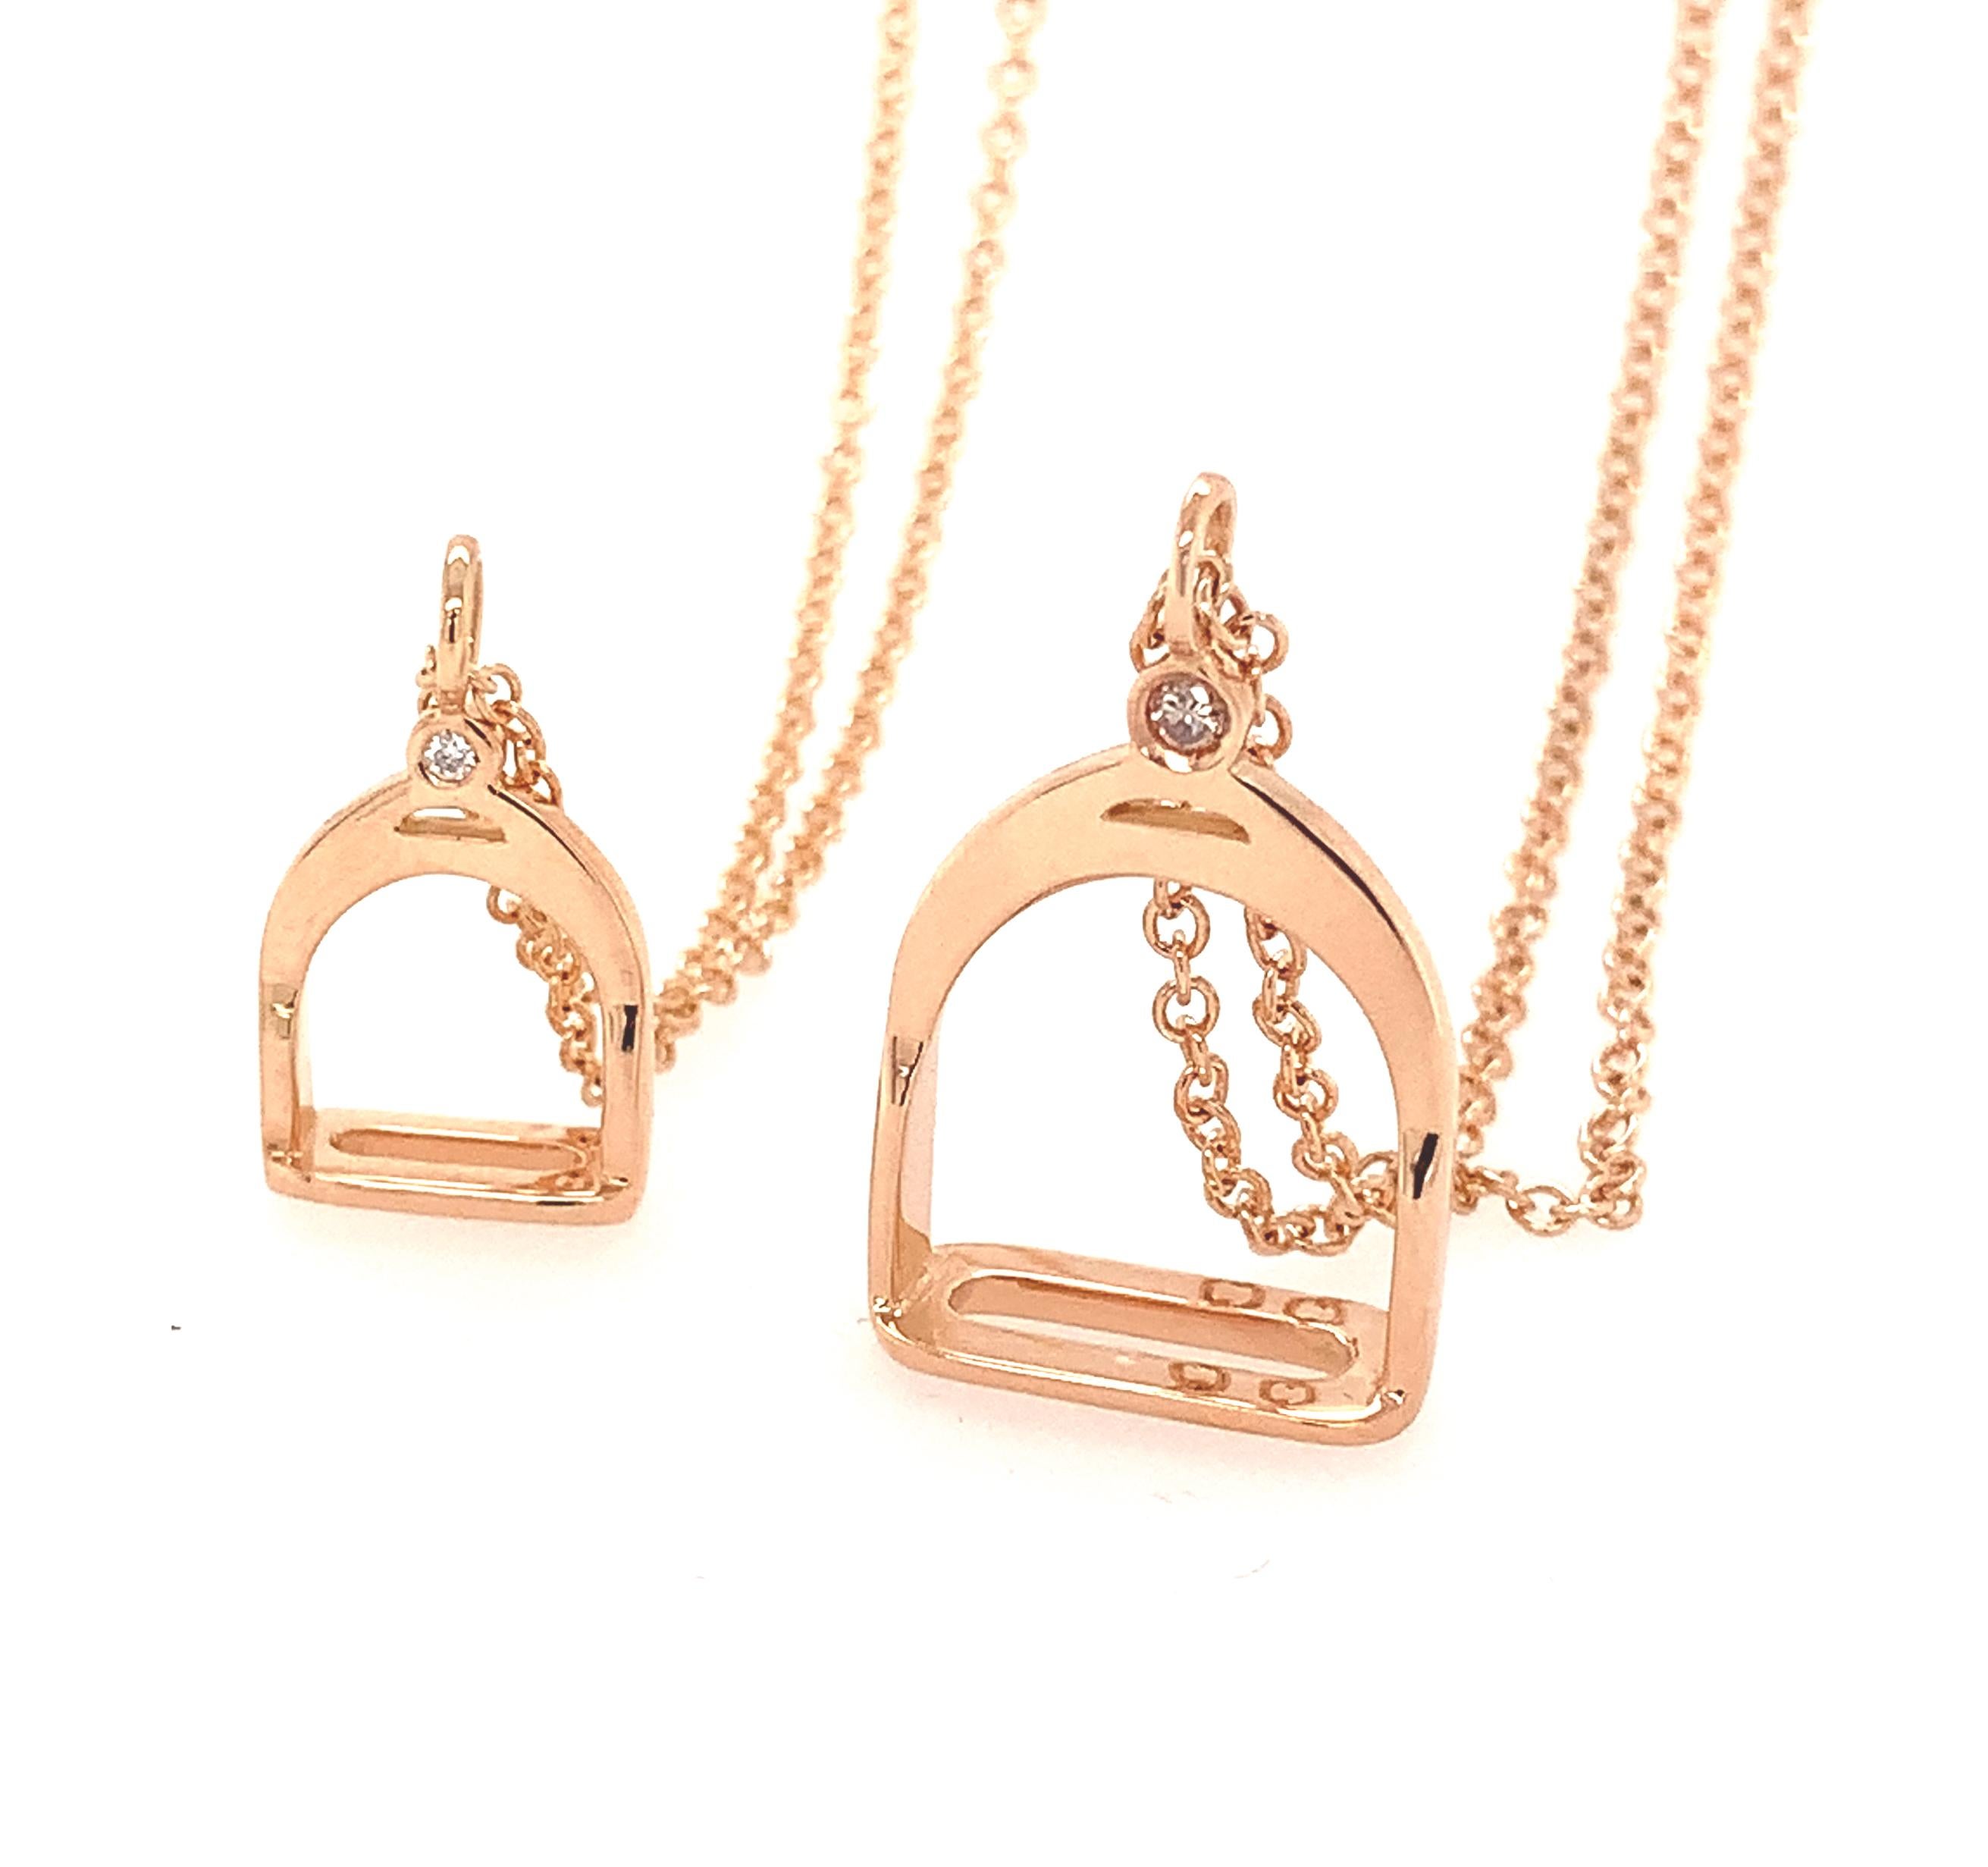 Garavelli 18 Karat Yellow Gold Pendant Necklace from Staffe Collection, featuring White diamond accent. Made in Valenza, Italy
Stirrup is 15mm tall and have one White diamond.
Total Chain length 16